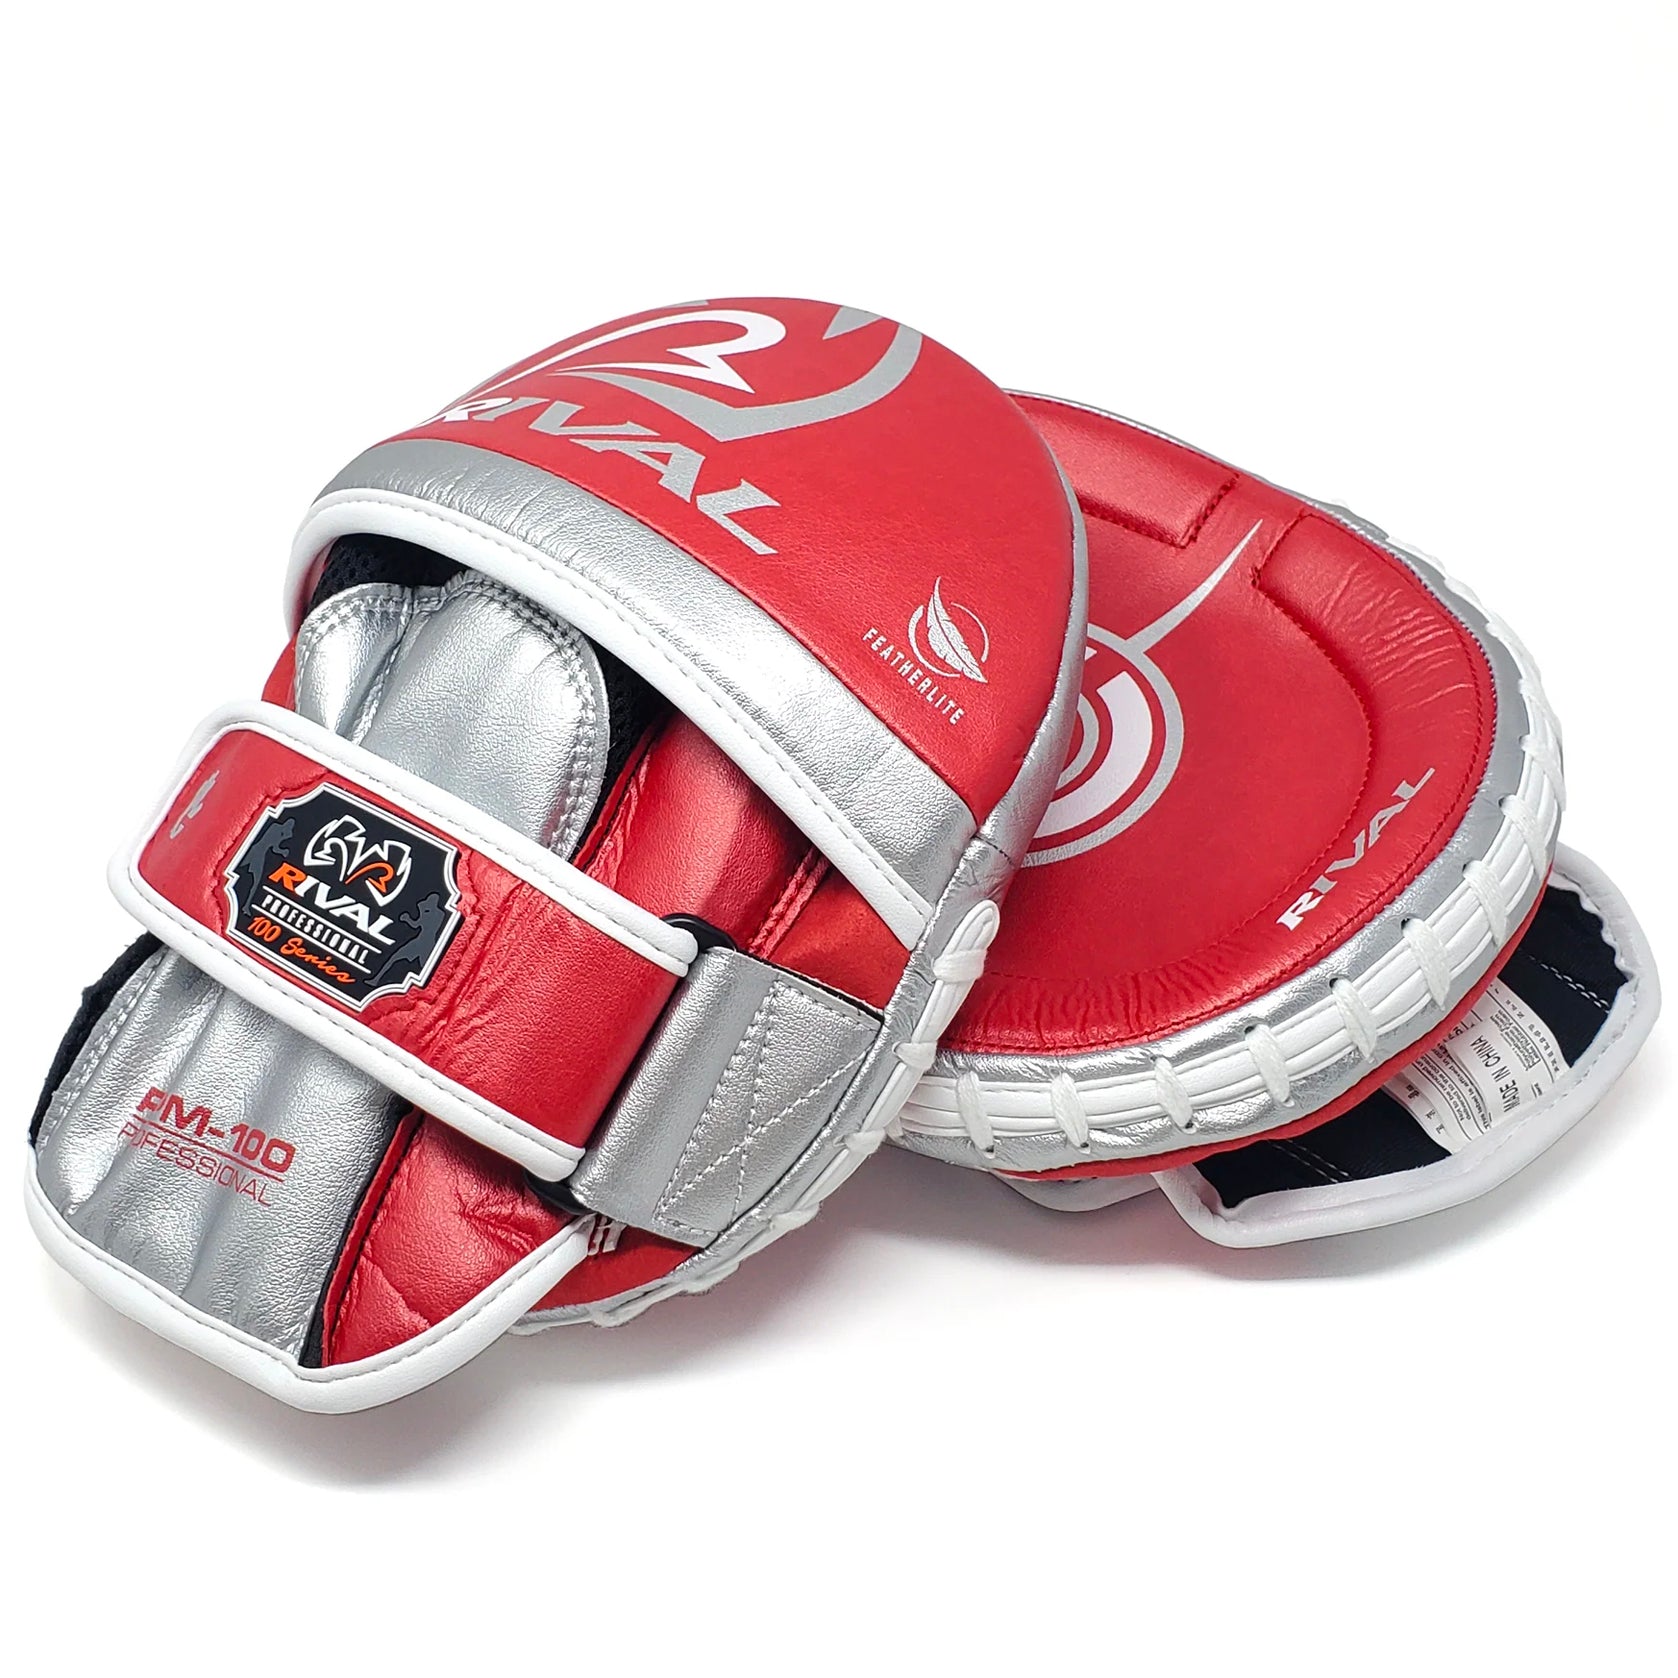 RIVAL Boxing RPM100 Professional Punch Mitts RIVAL